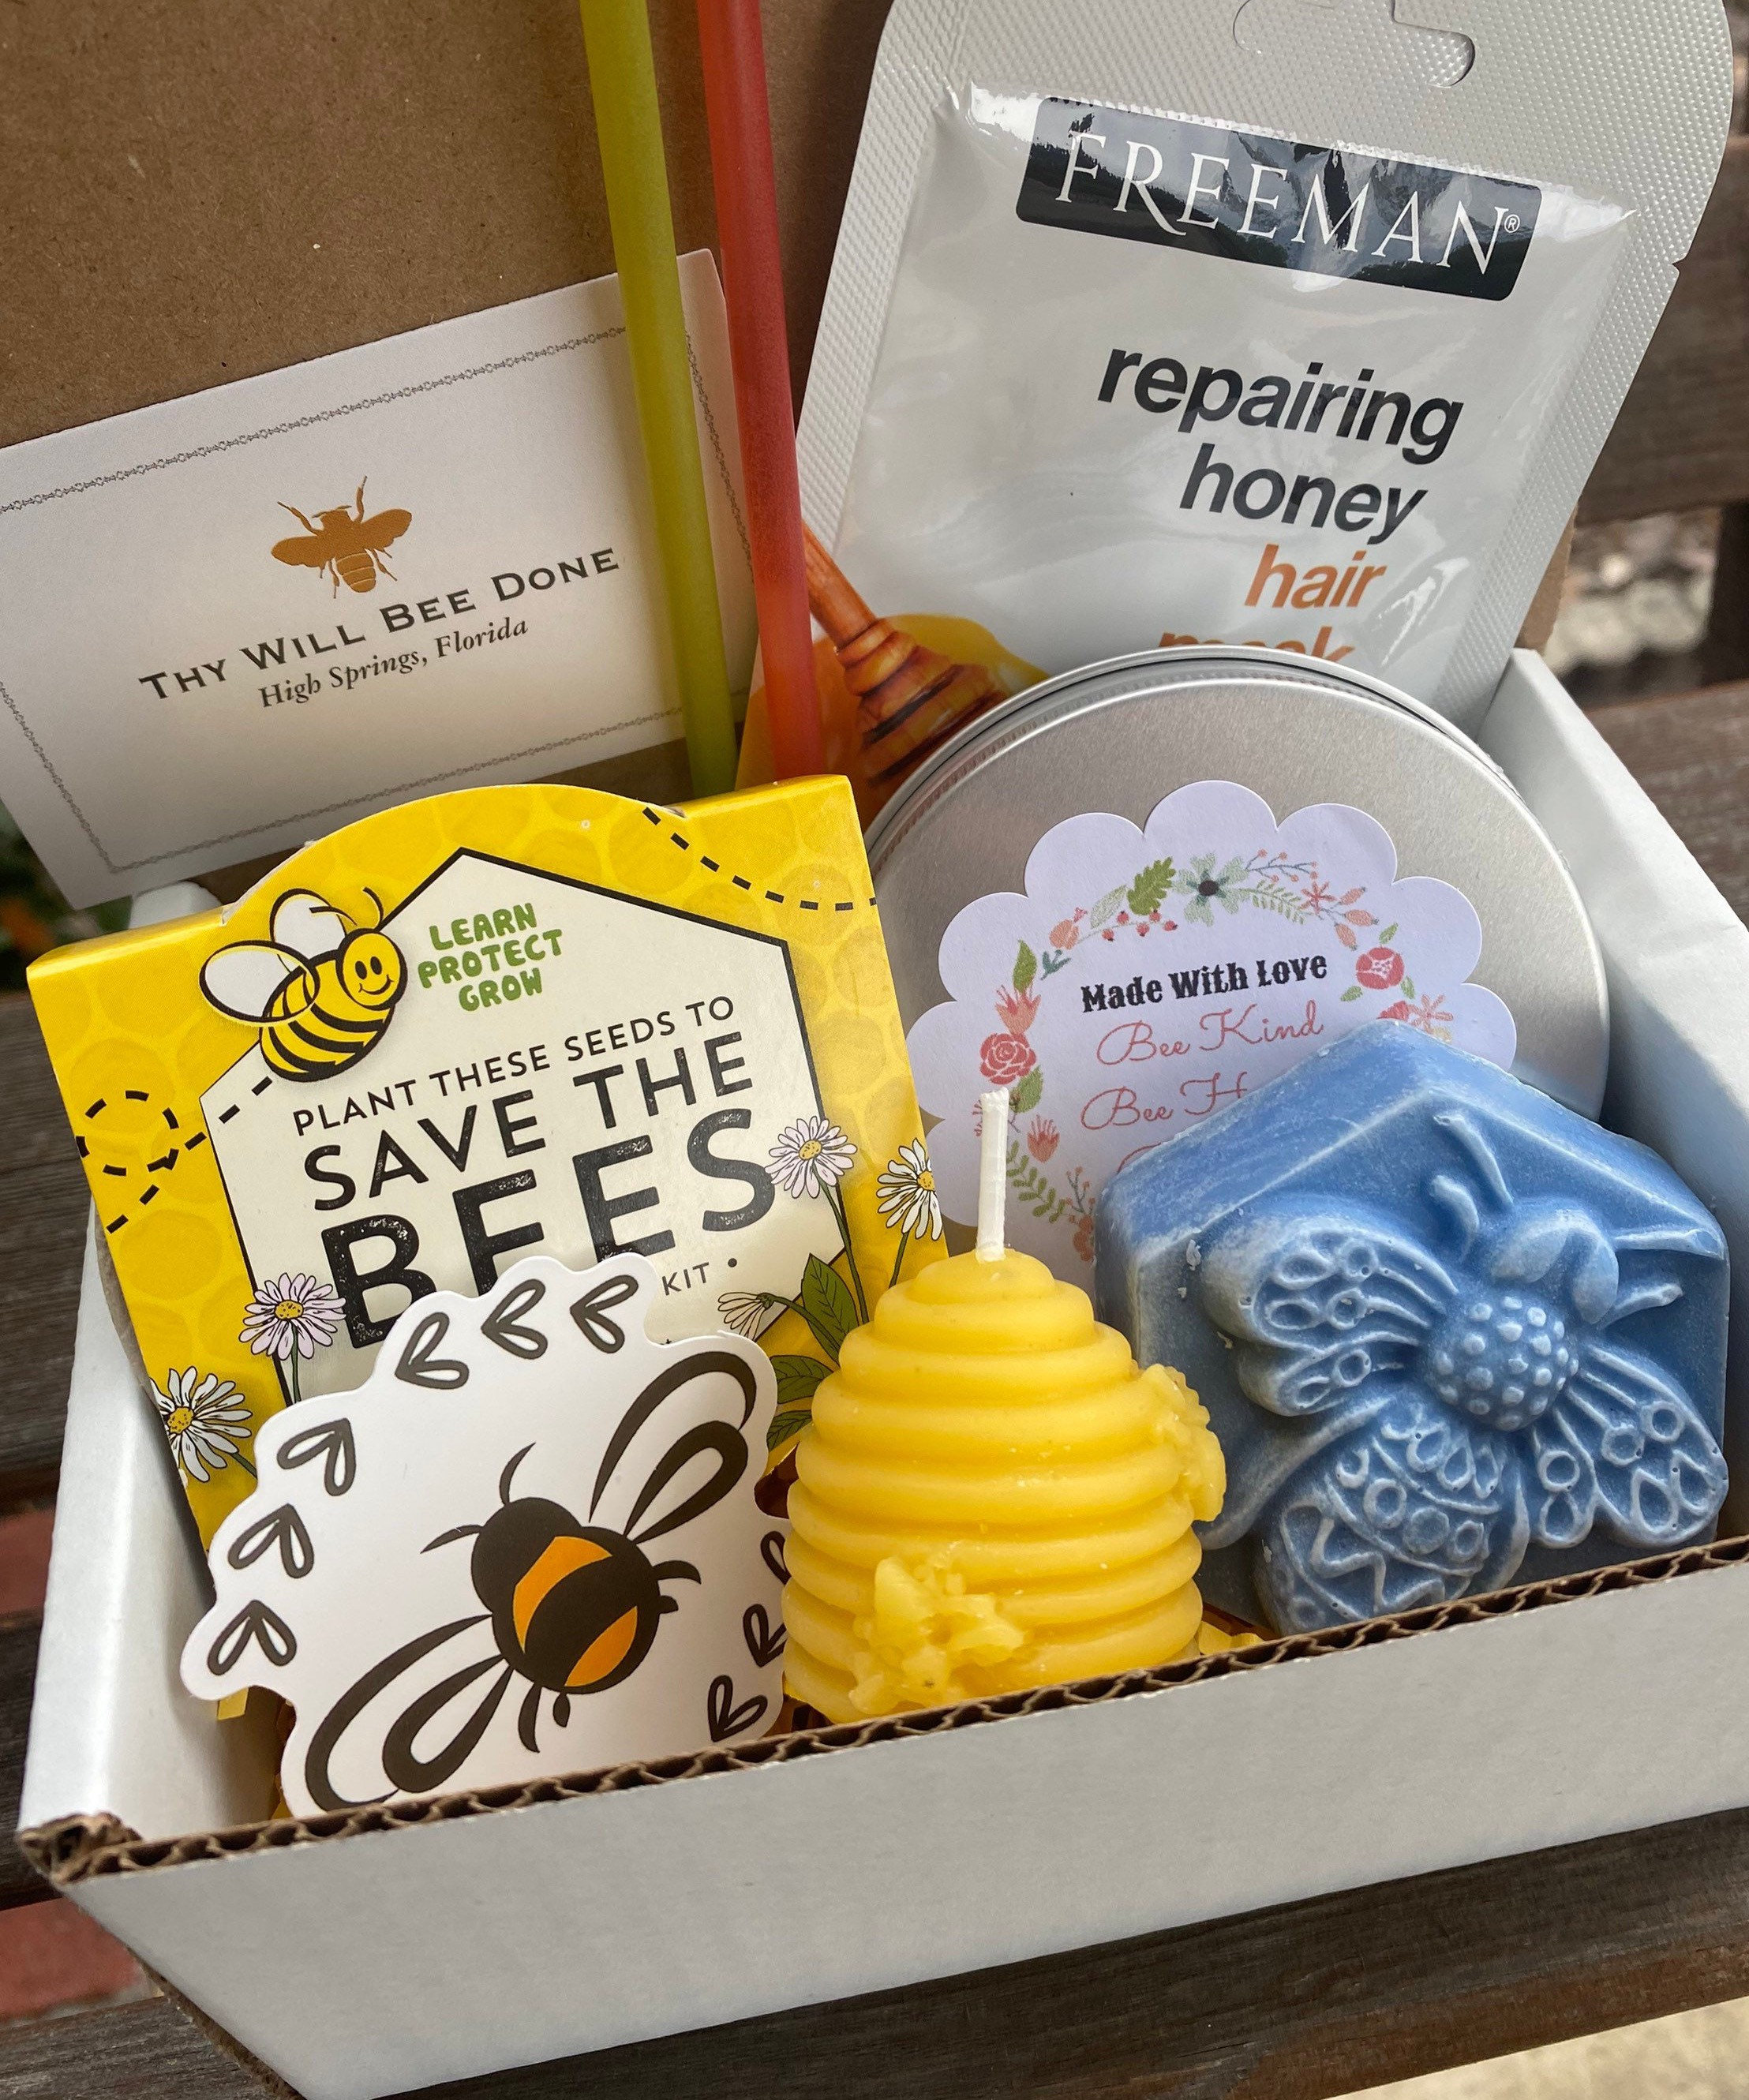 Taos Bee  Bee Wonderful Spa-Inspired Gift Box Set Filled with Honey Soap  and More – taosbee